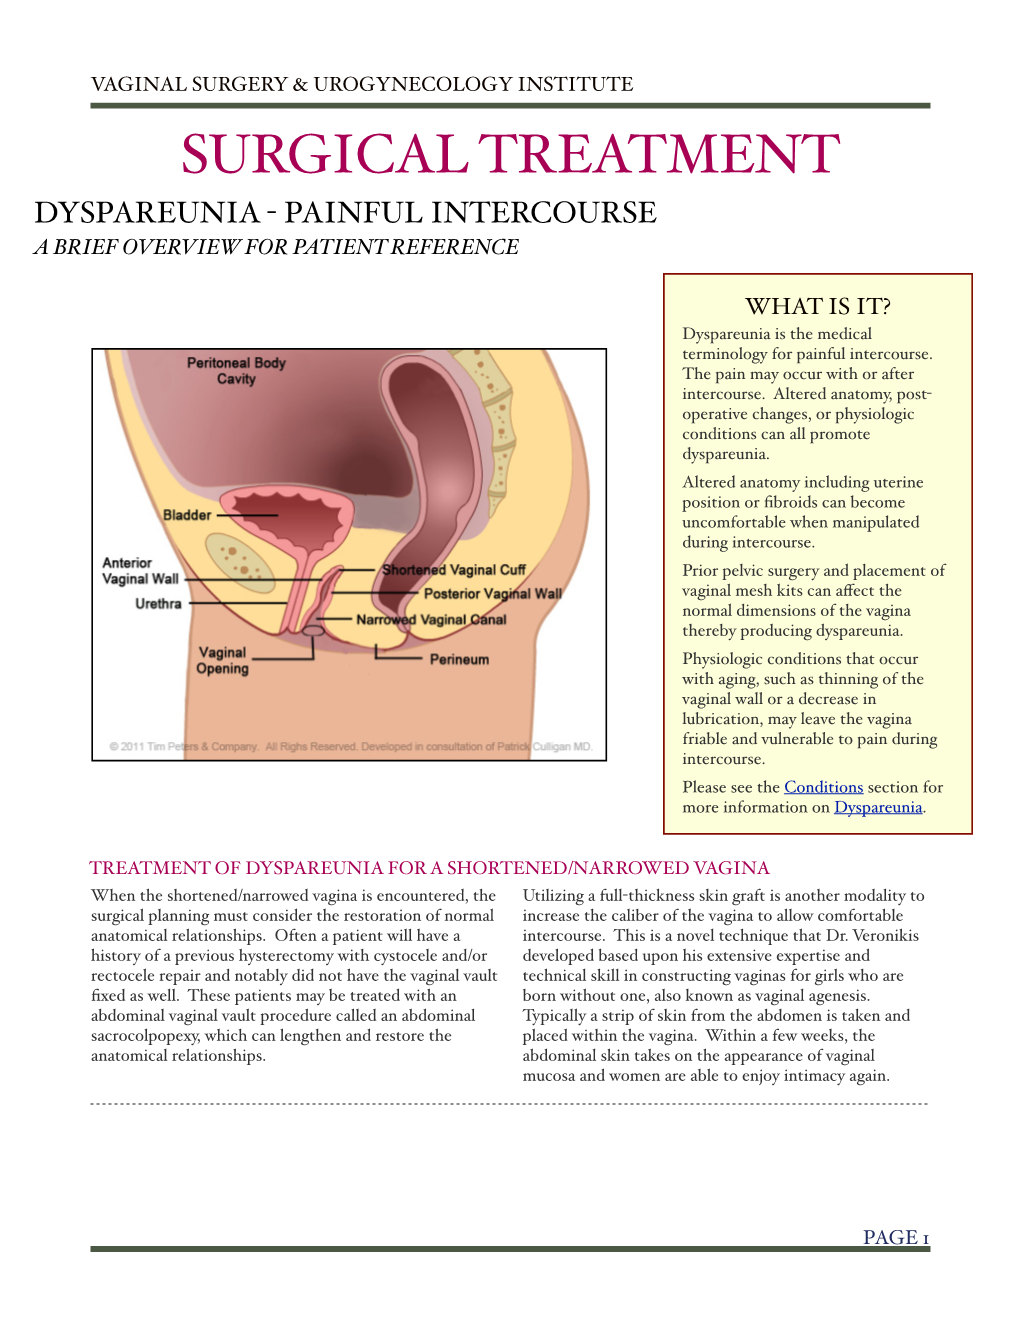 Surgical Treatment Dyspareunia - Painful Intercourse a Brief Overview for Patient Reference